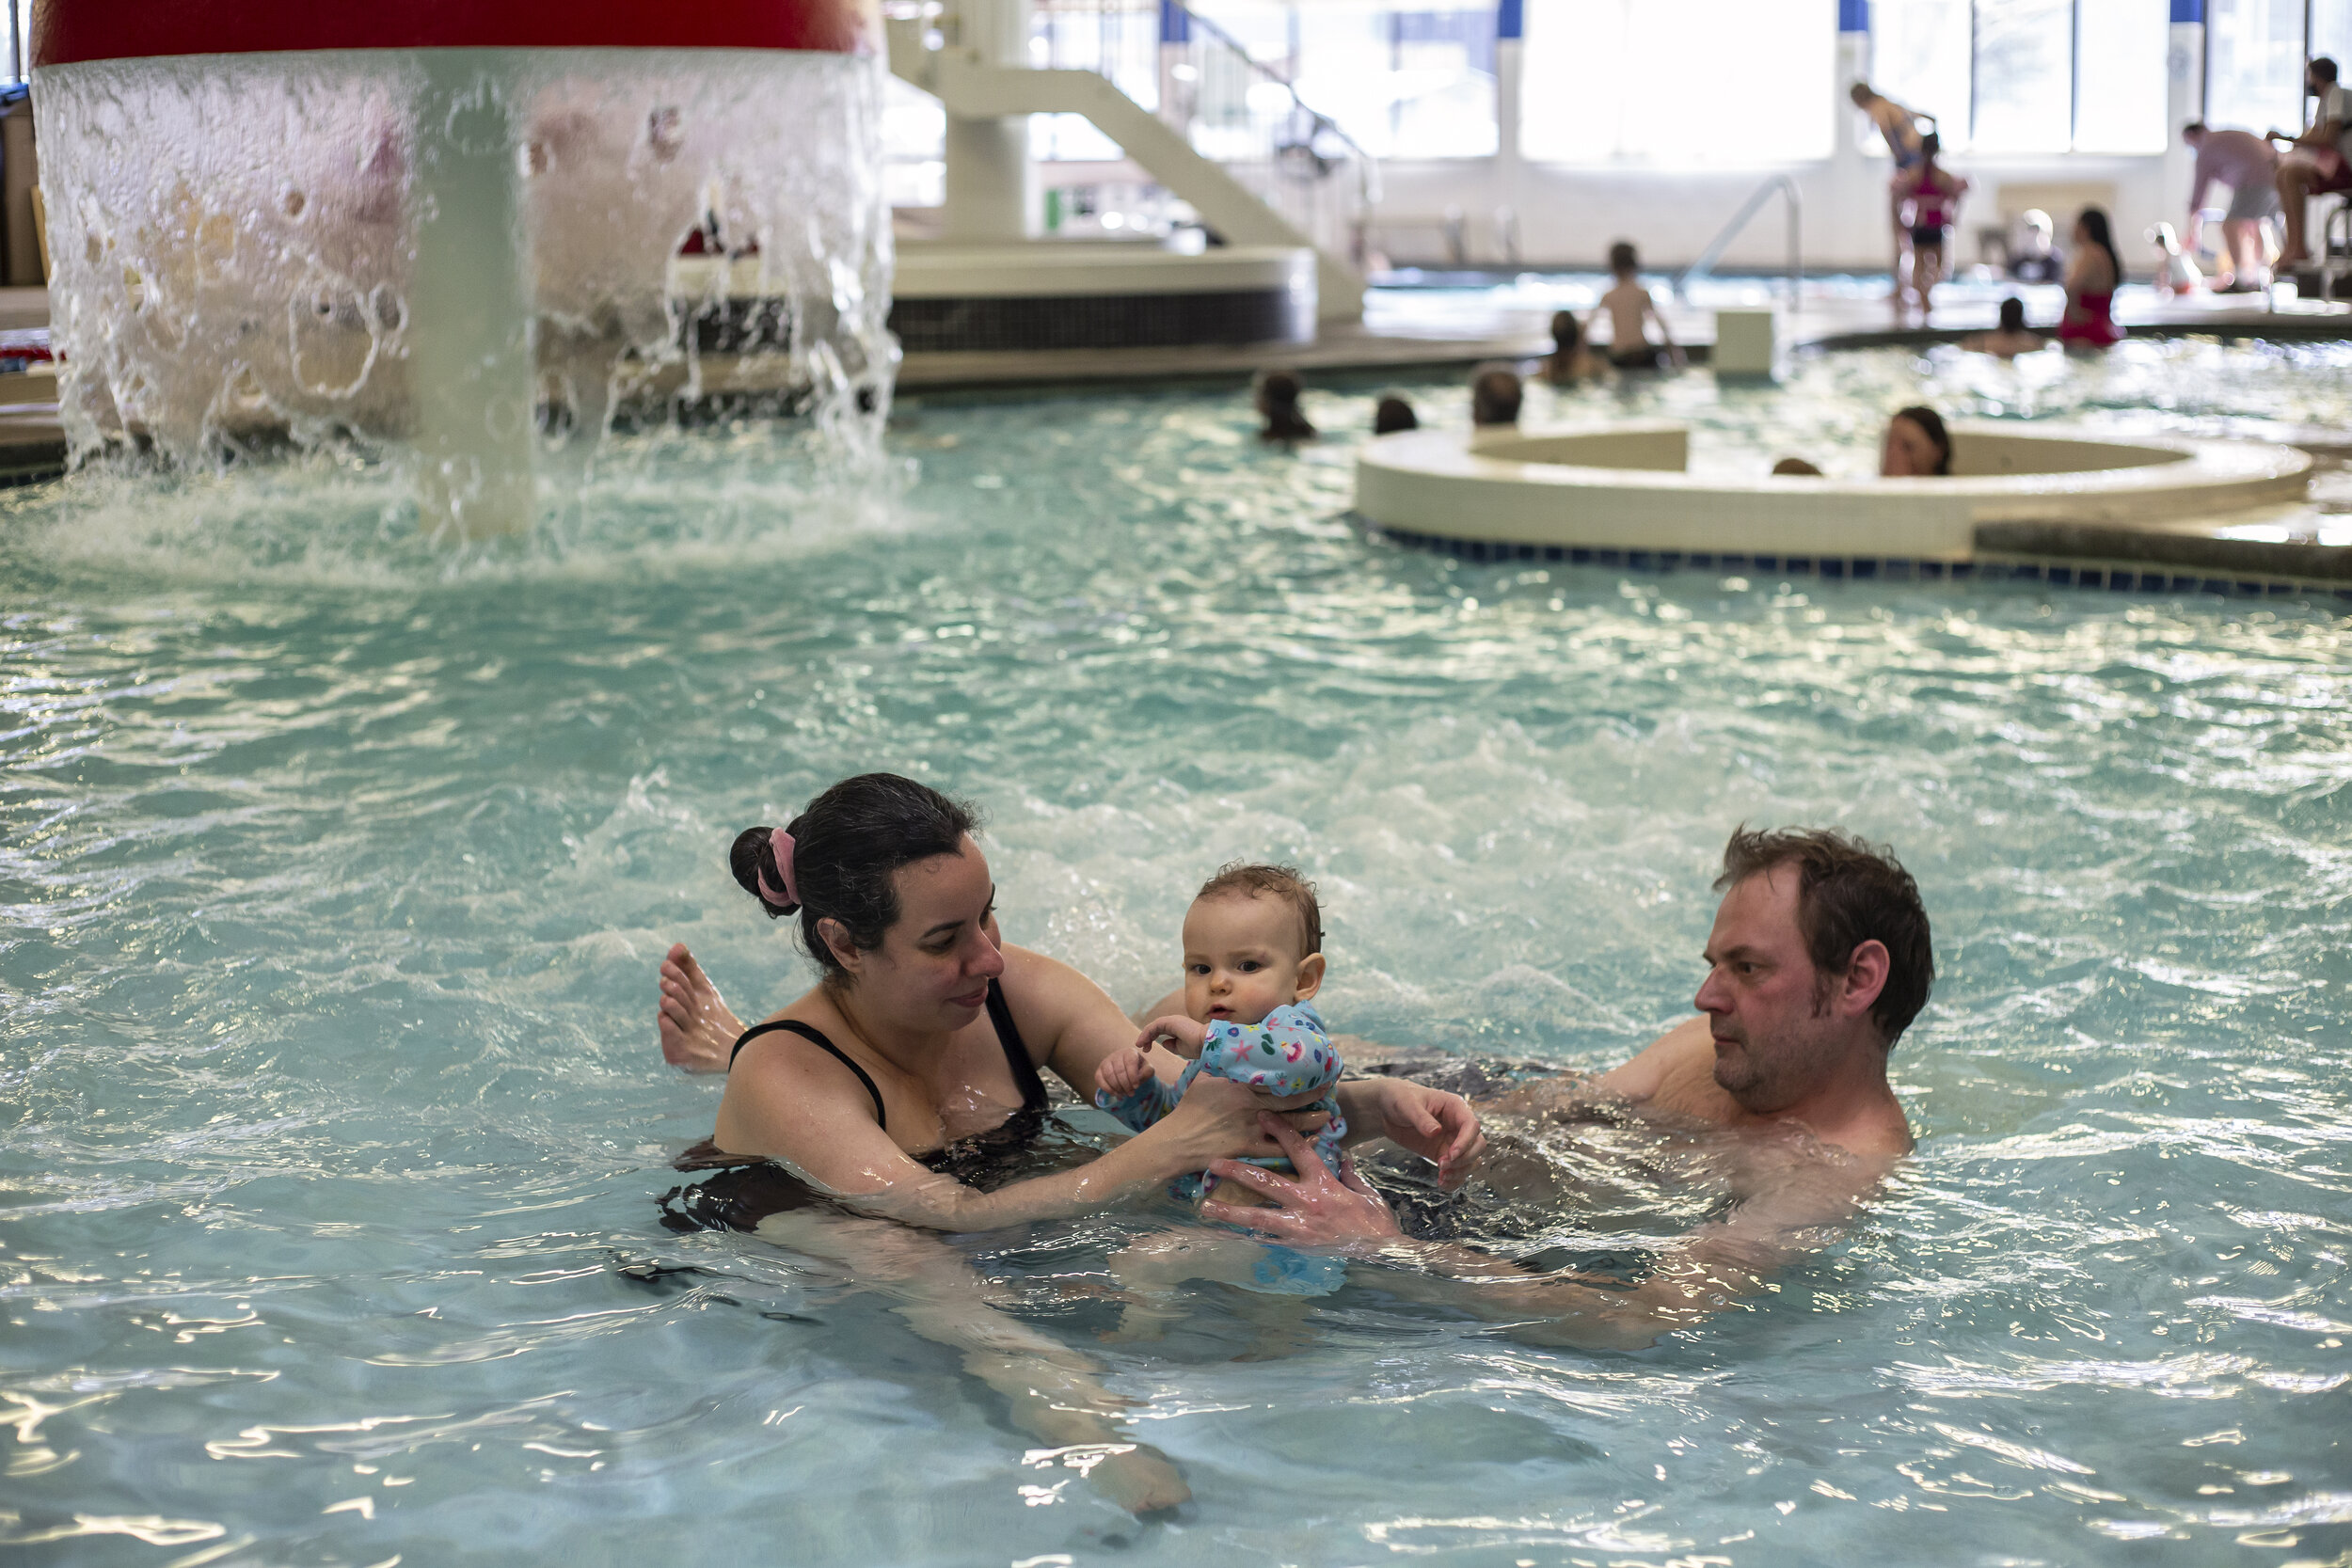  Souza and James Metcalf take Isadora for a swim at the Teton County/Jackson Recreation Center on March 7, a day after her first birthday. Isadora loves playing in the bath, so they decided taking her to the pool would be a good opportunity for her t